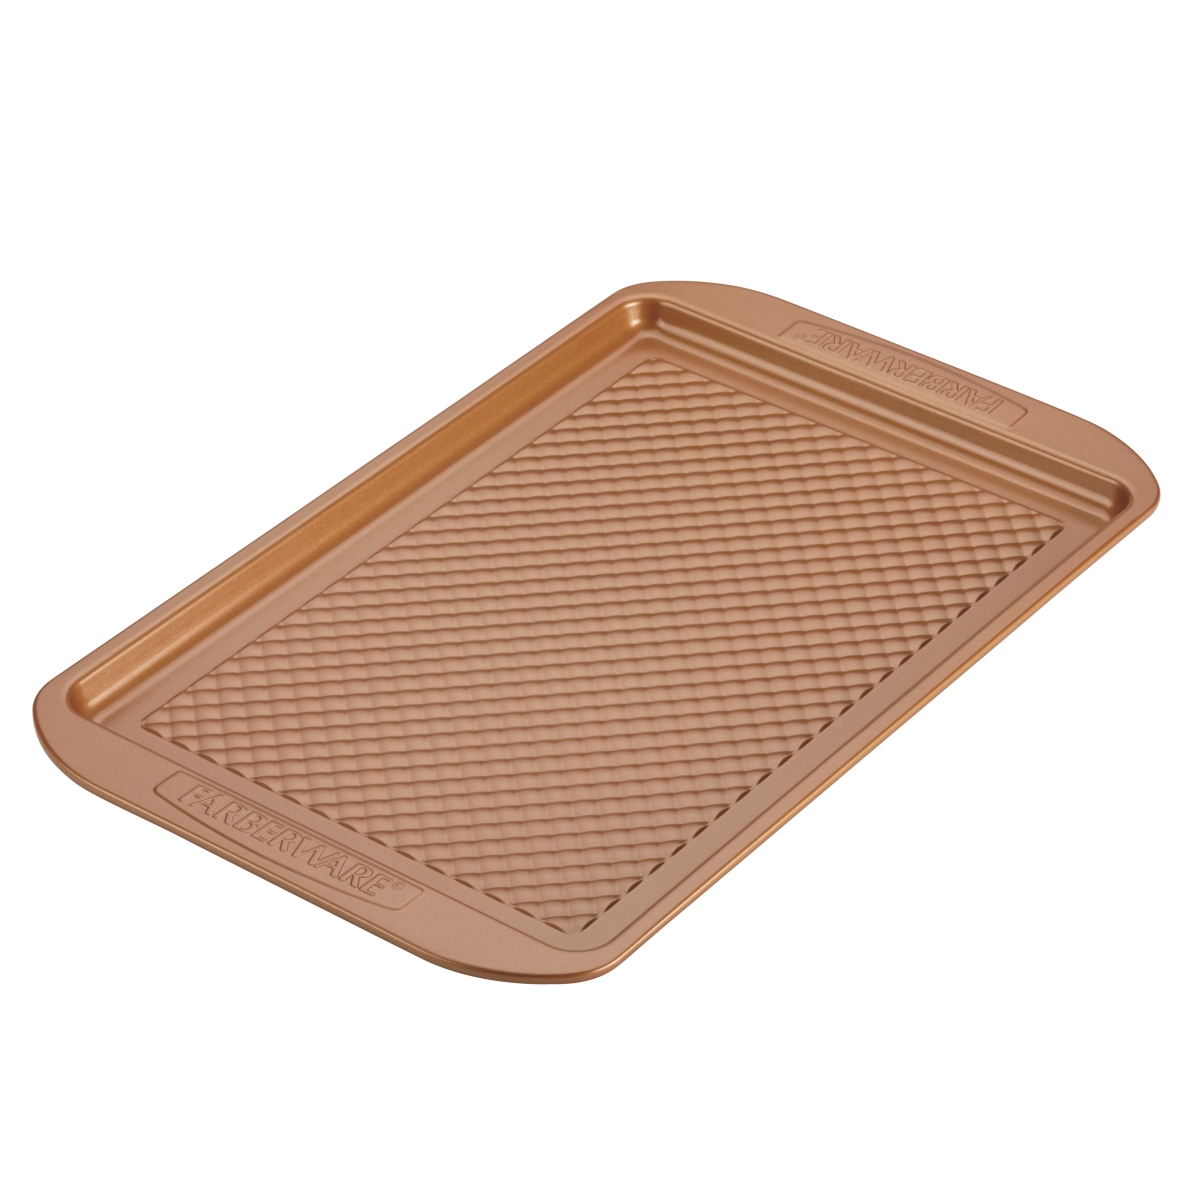 47139 Colorvive Nonstick Cookie Pan, Copper - 11 X 17 In.